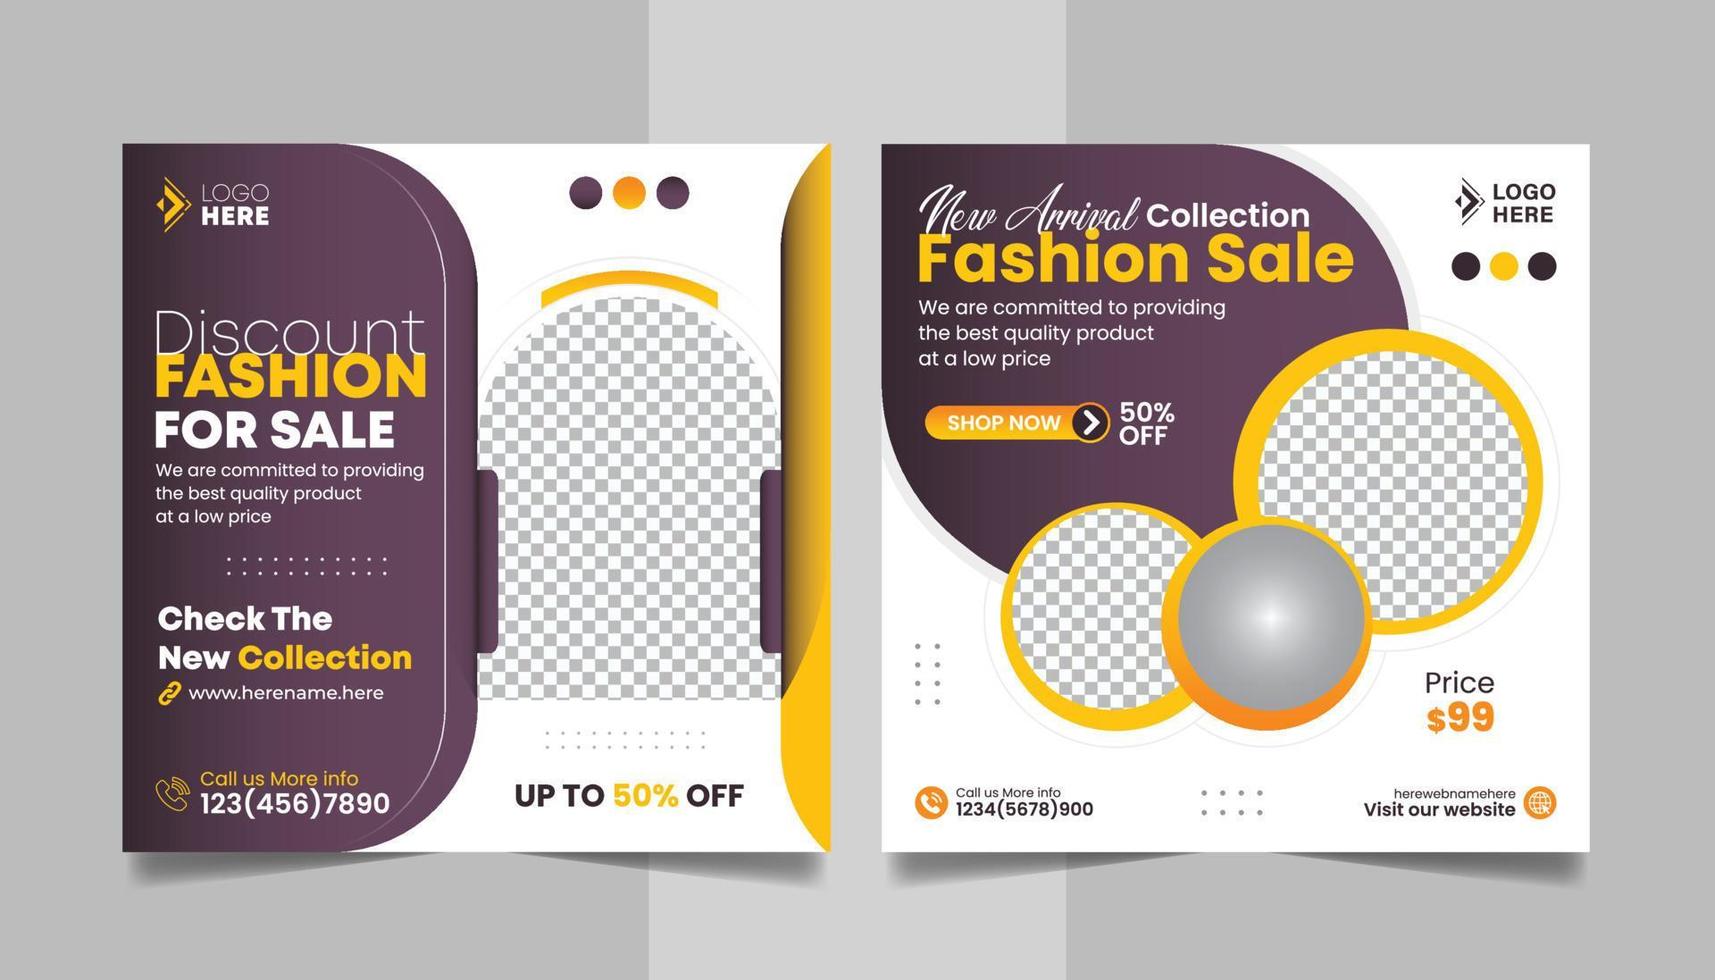 New Collection Fashion Sale Promotion Social Media Post Design Square Web Banner Template. vector